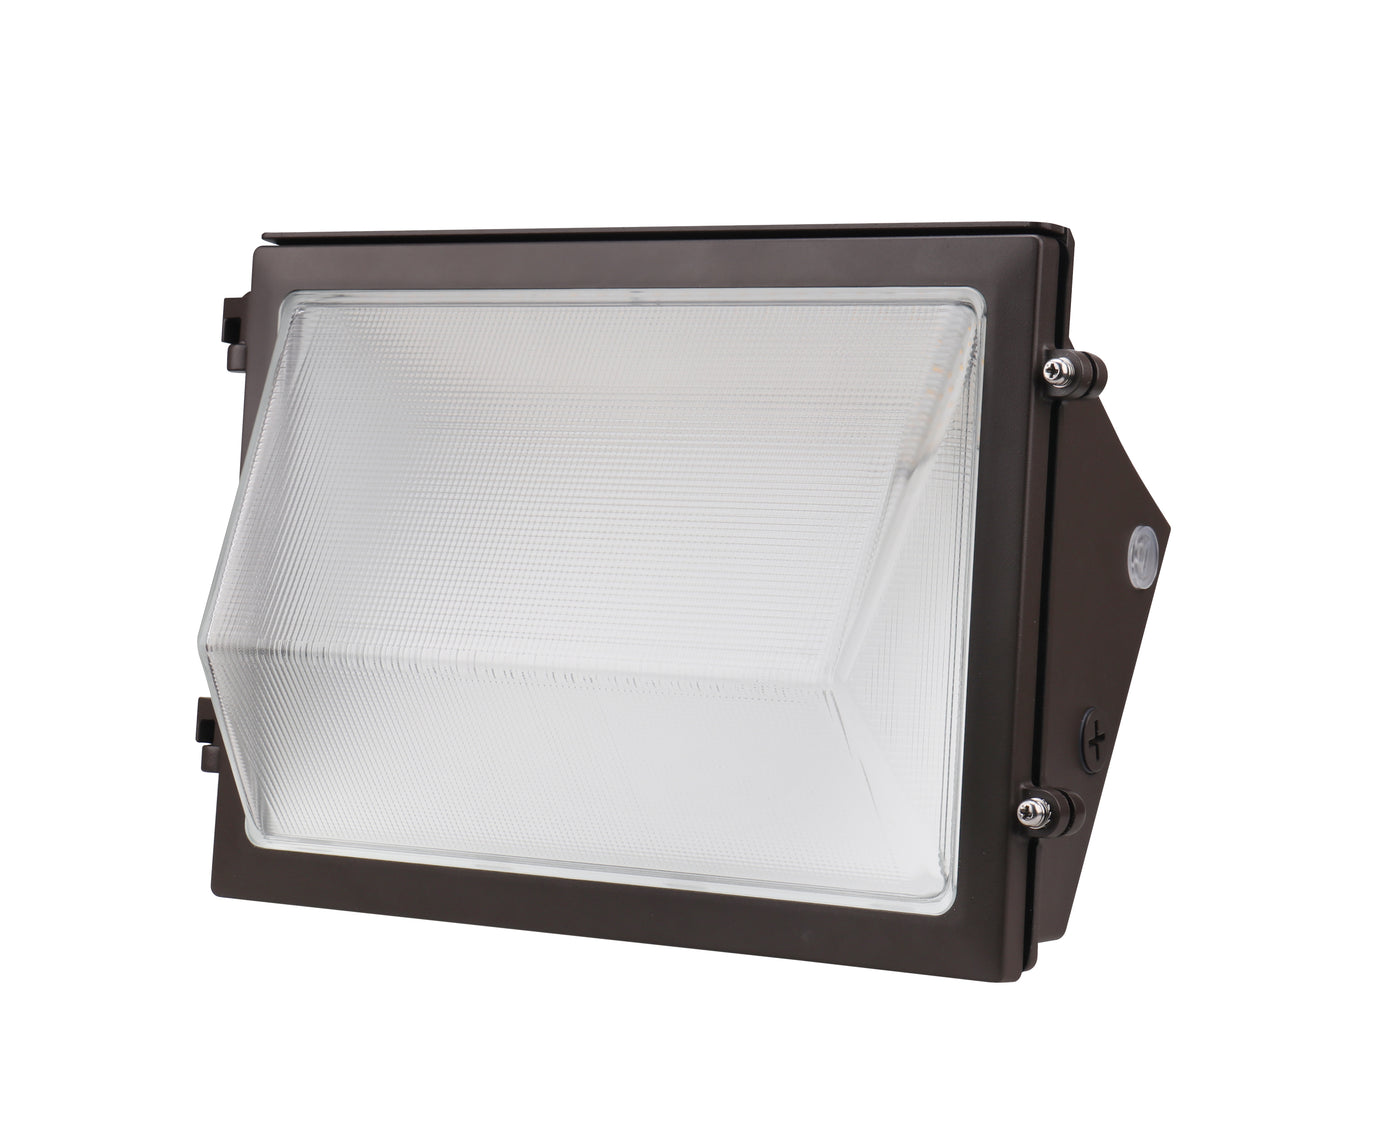 LED Traditional Wall Pack, 10,800 Lumen Max, Wattage and CCT Selectable, 0-10V Dimming, Photocell, 120-277V or 277-480V